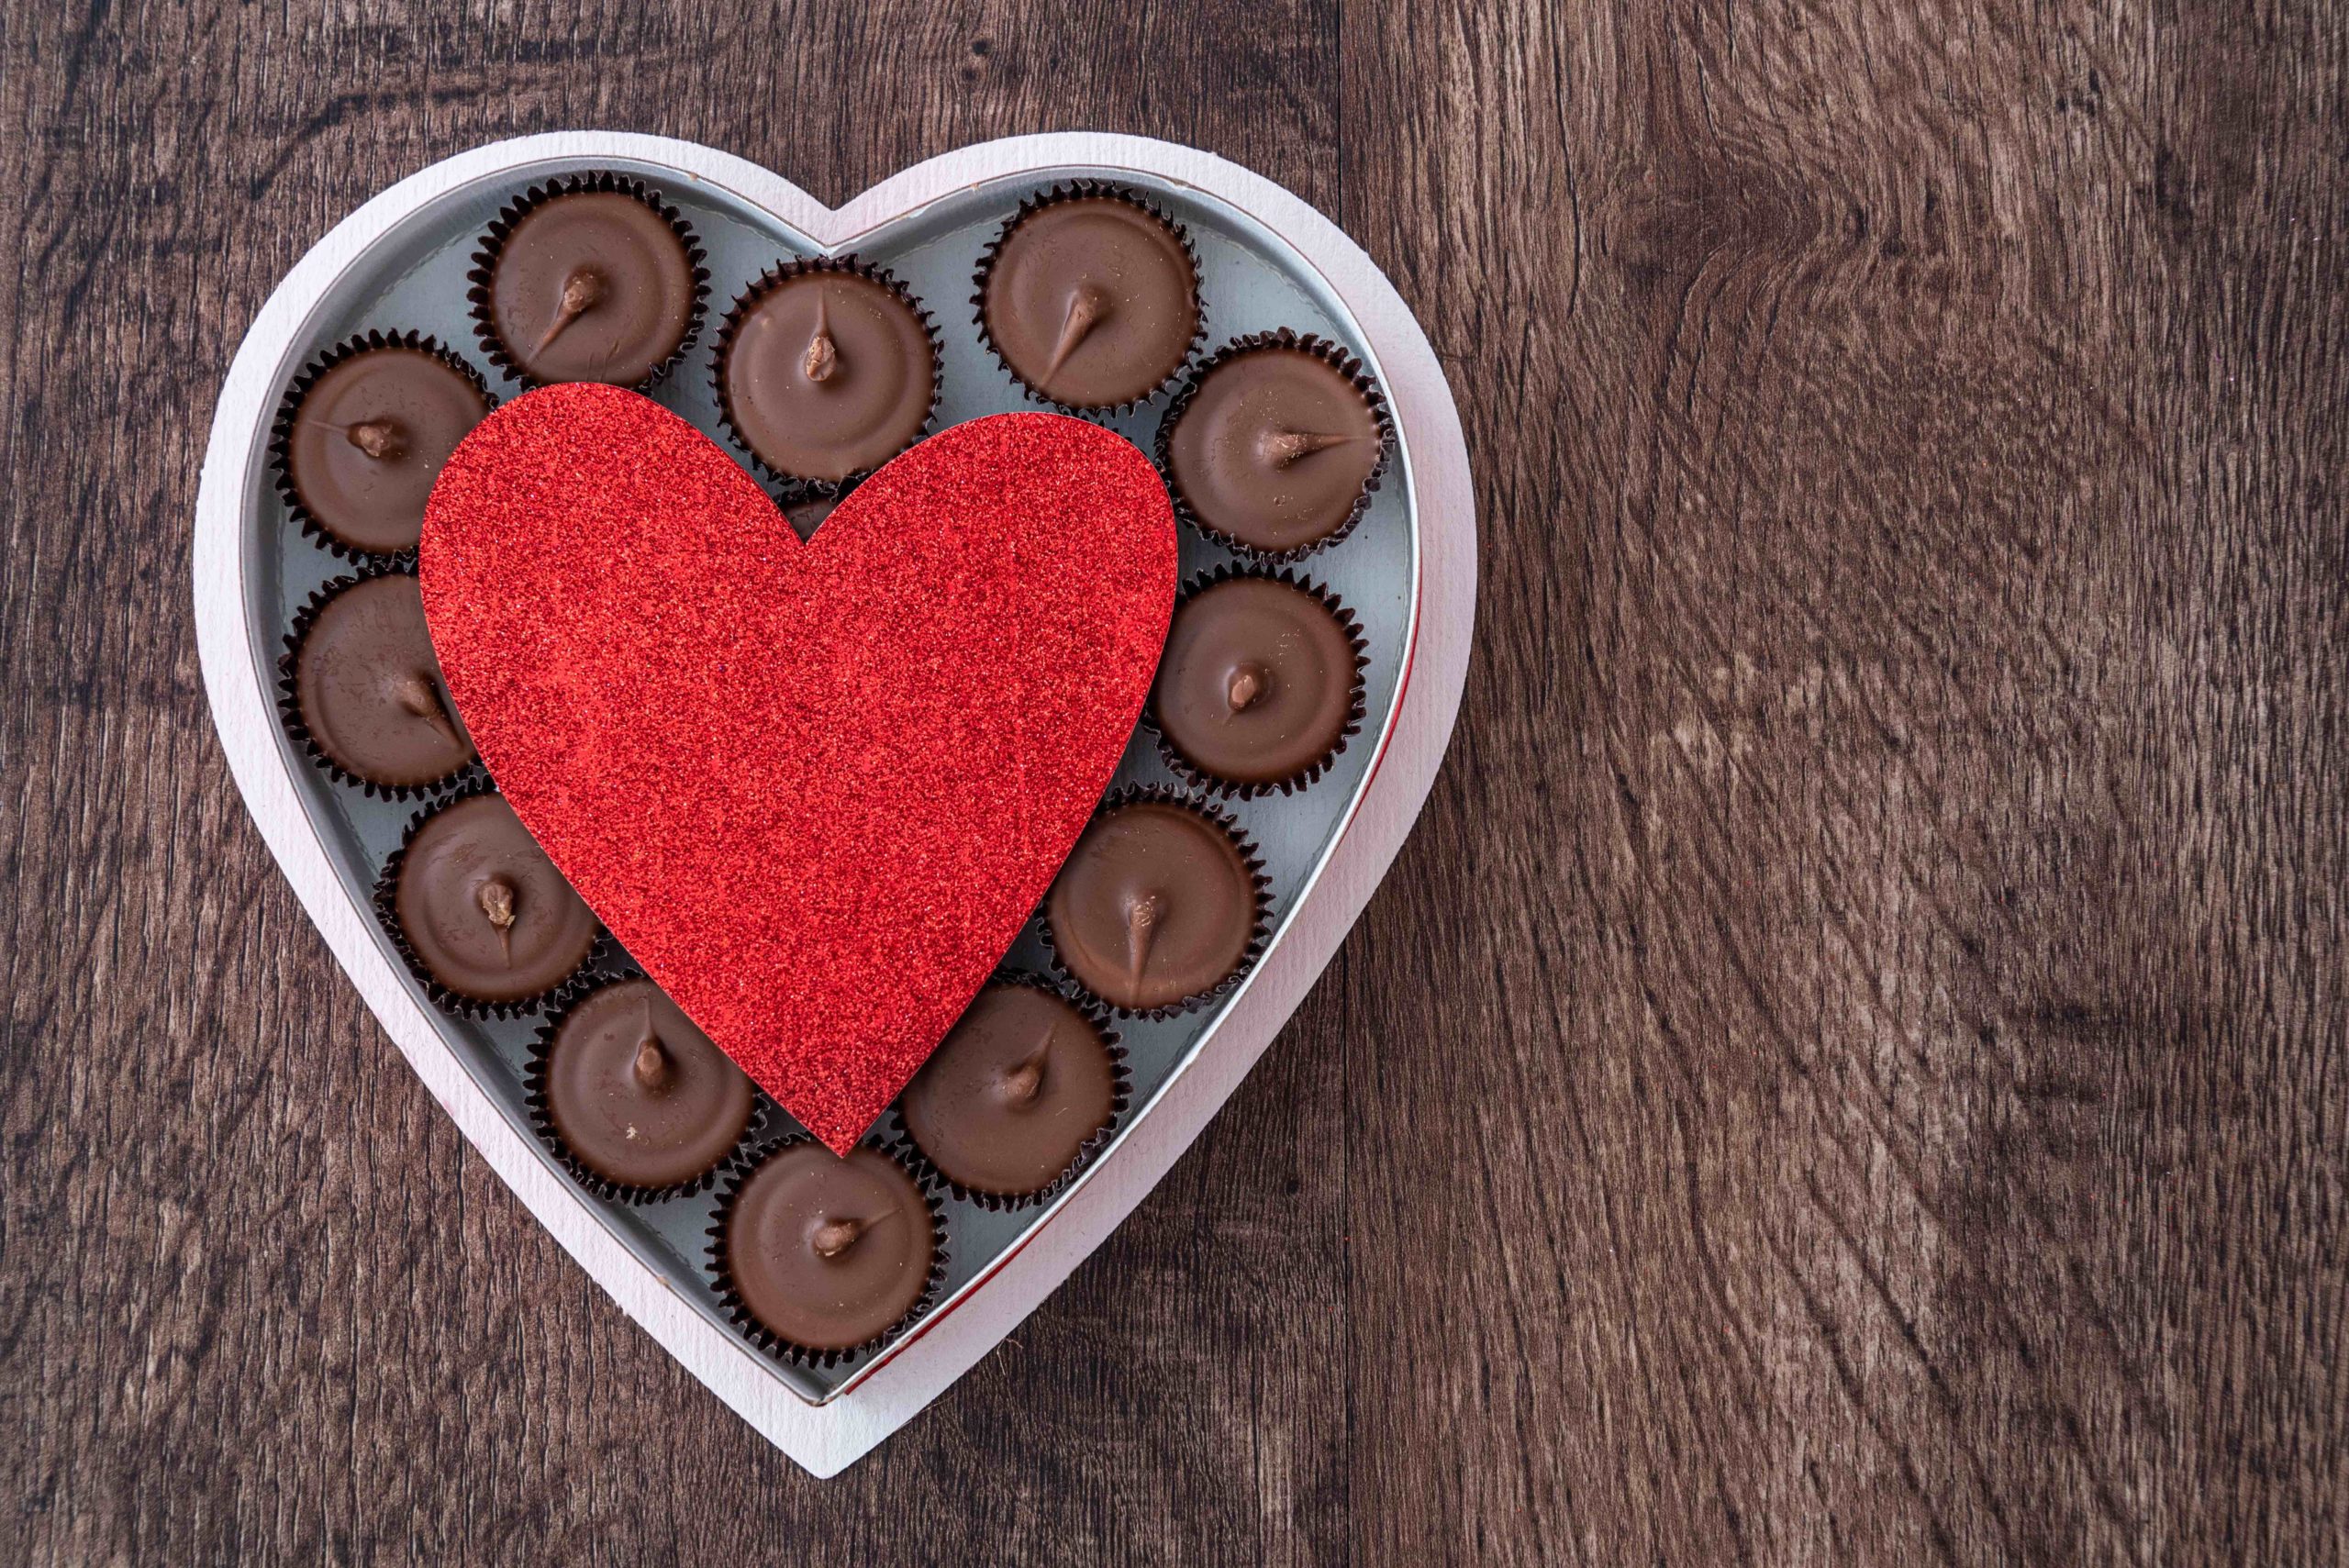 Heart shaped tray with chocolates in it on a wood table